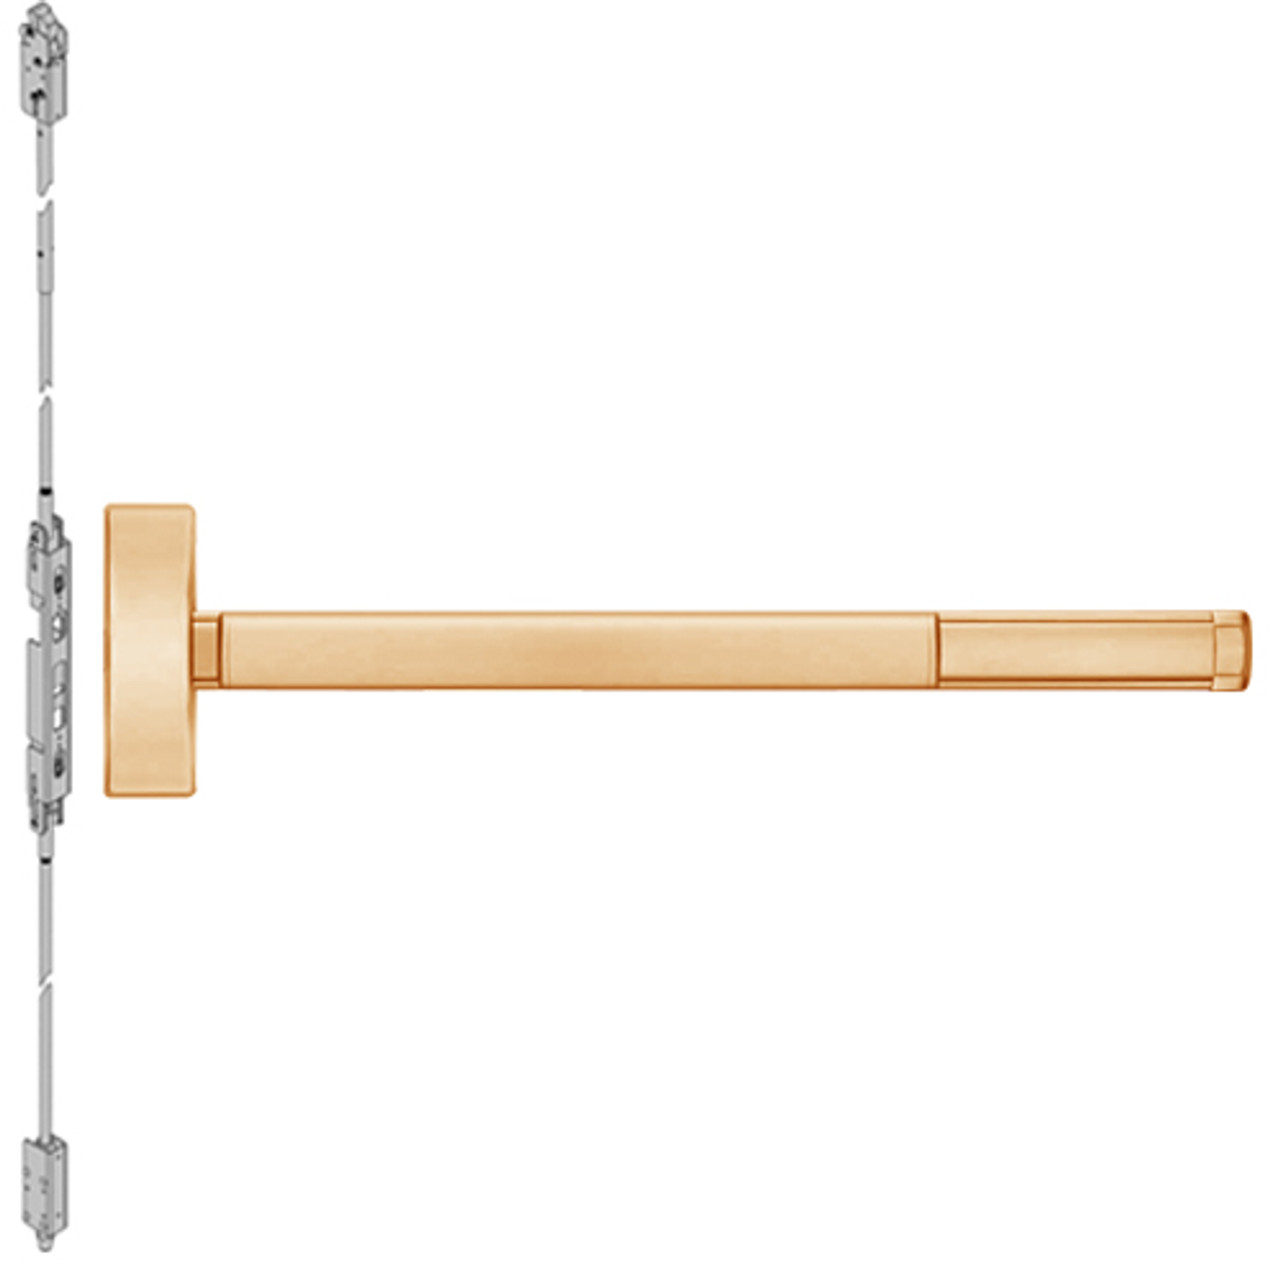 DE2801-612-48 PHI 2800 Series Concealed Vertical Rod Exit Device with Delayed Egress Prepped for Cover Plate in Satin Bronze Finish